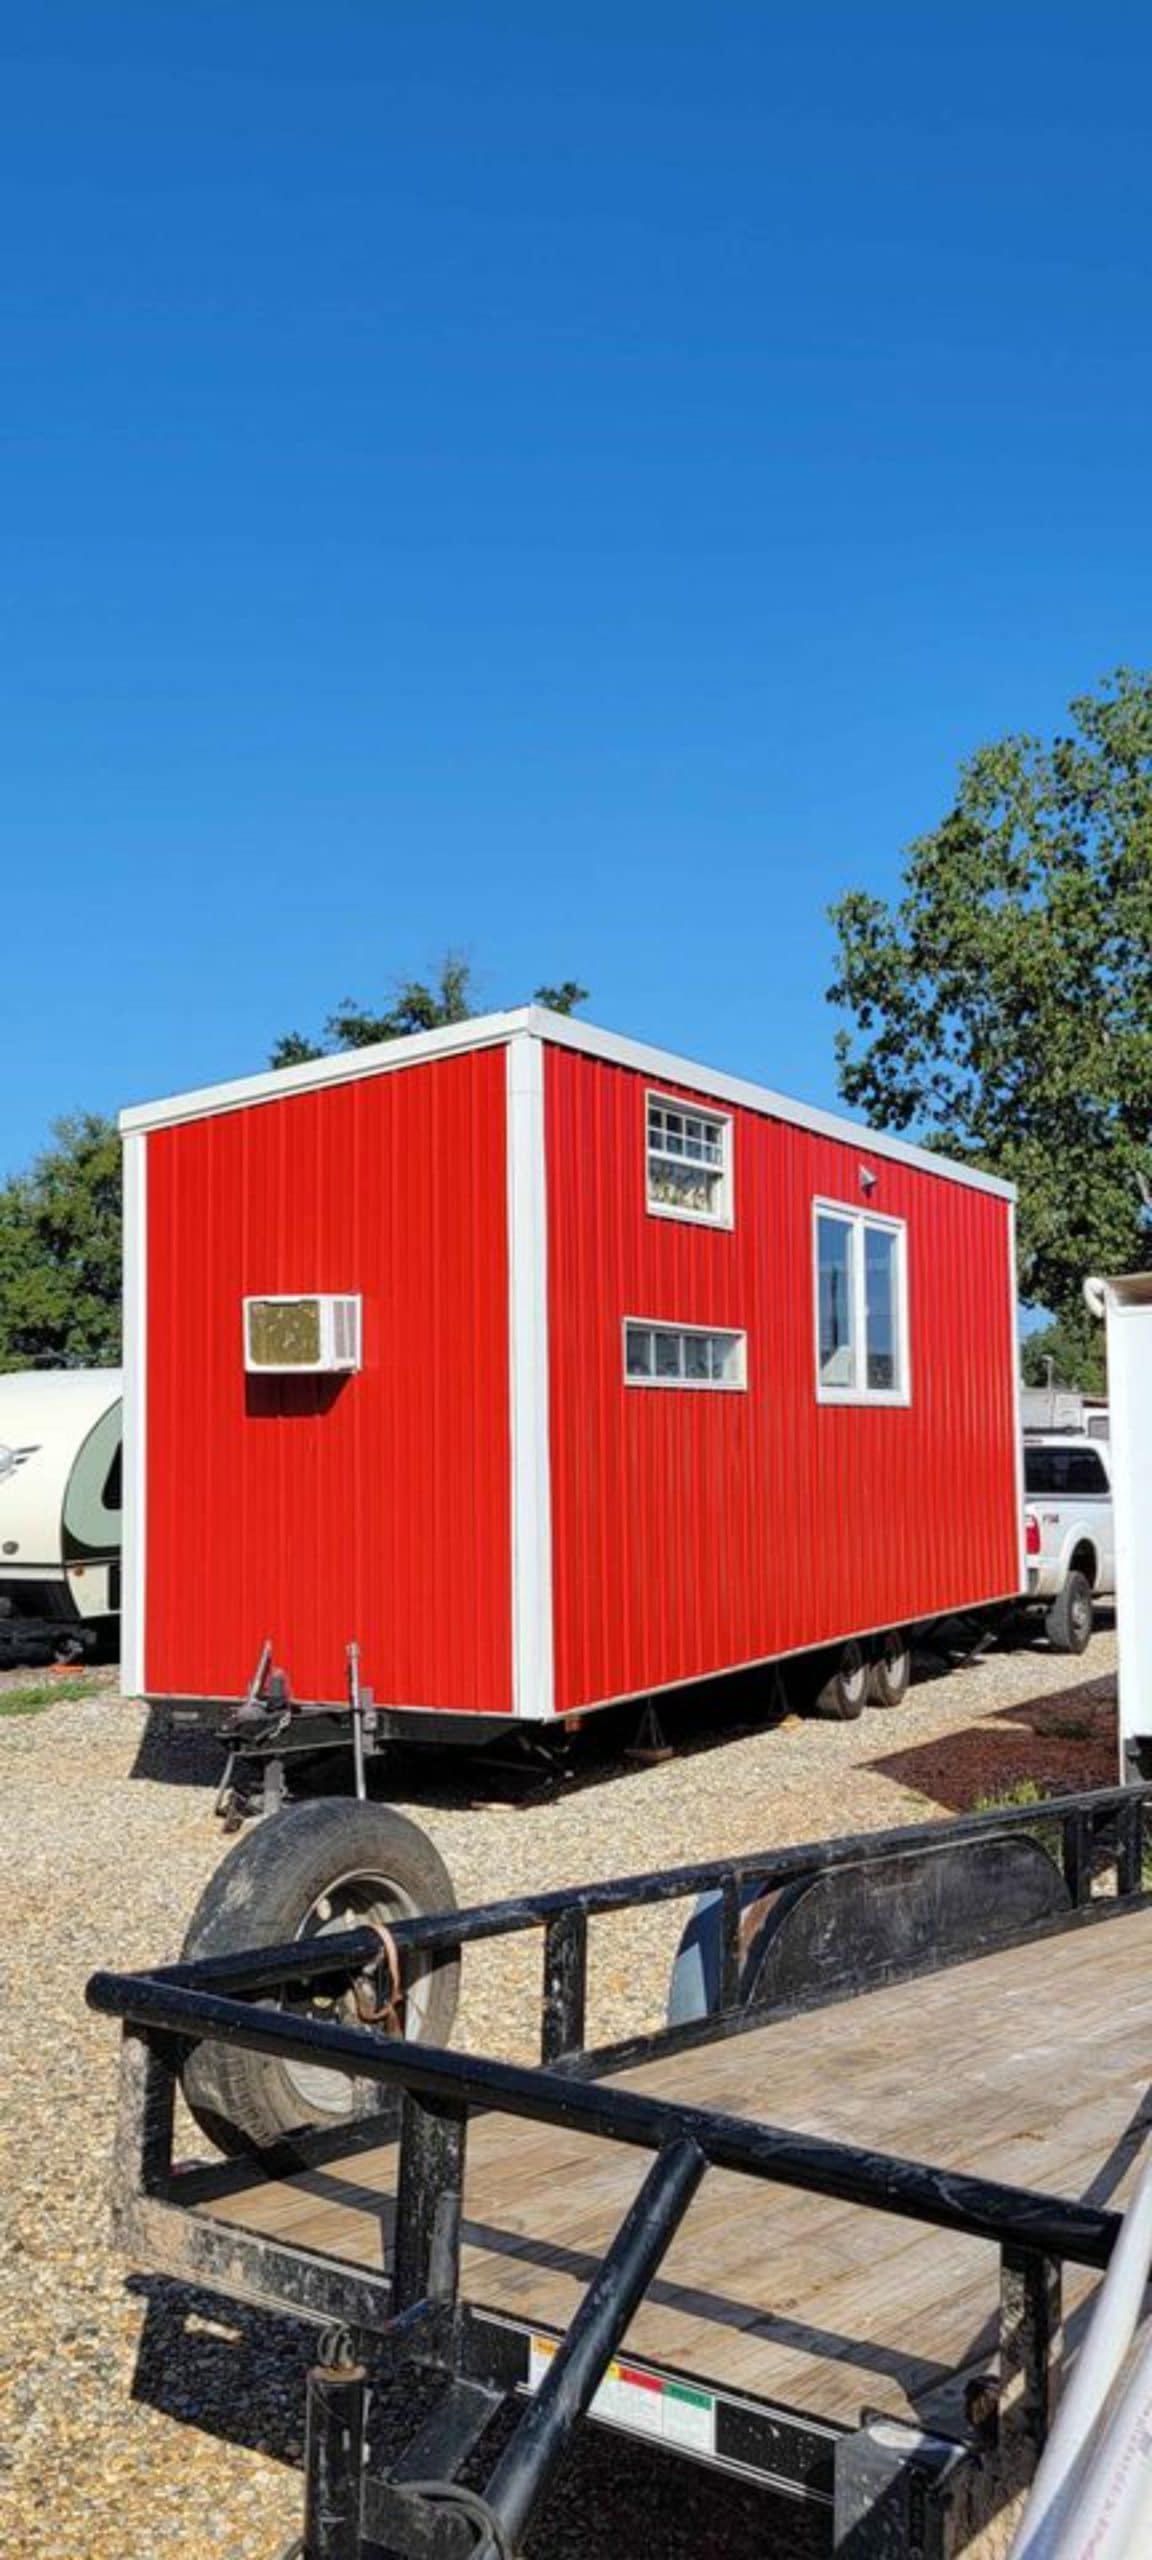 Stunning red exterior of 28' Budget Friendly Tiny House Has Two Lofts